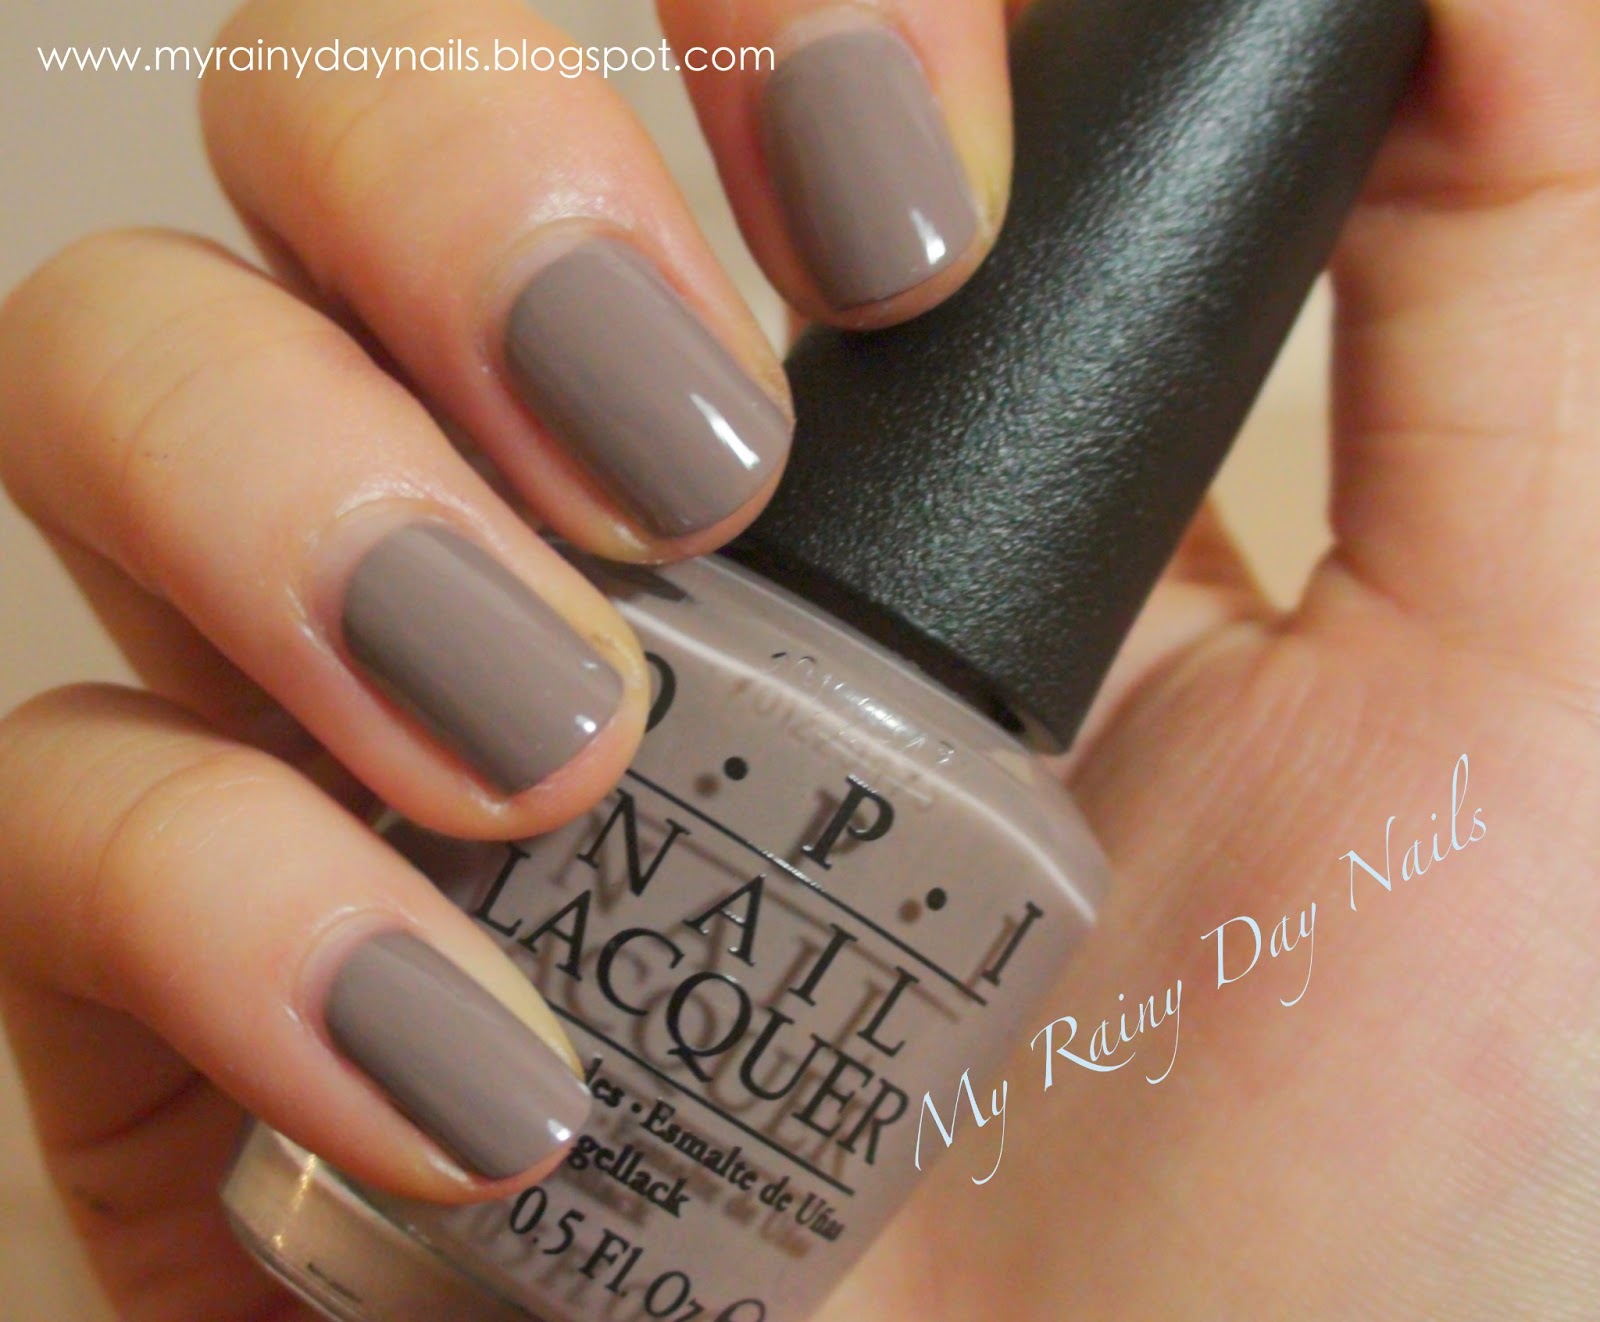 2. OPI "Berlin There Done That" from the Germany Collection - wide 7